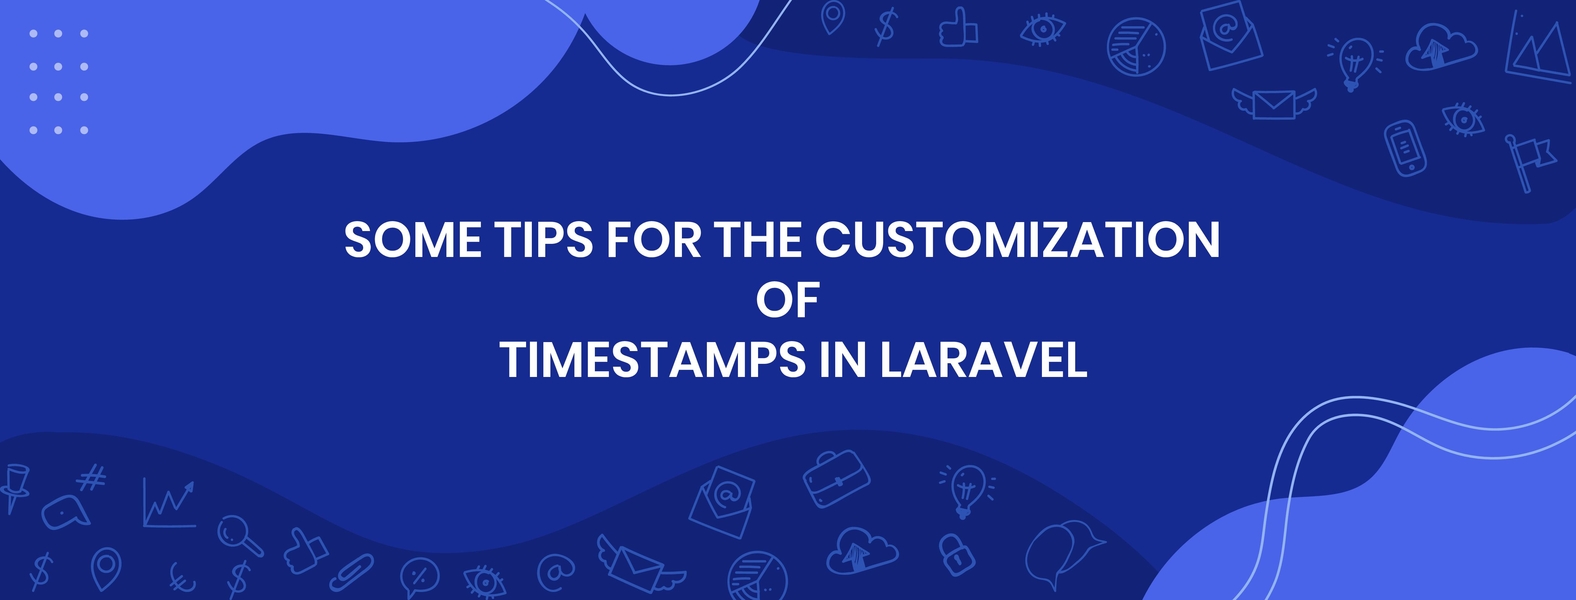 Some Tips for the Customization of Laravel Timestamps  cover image